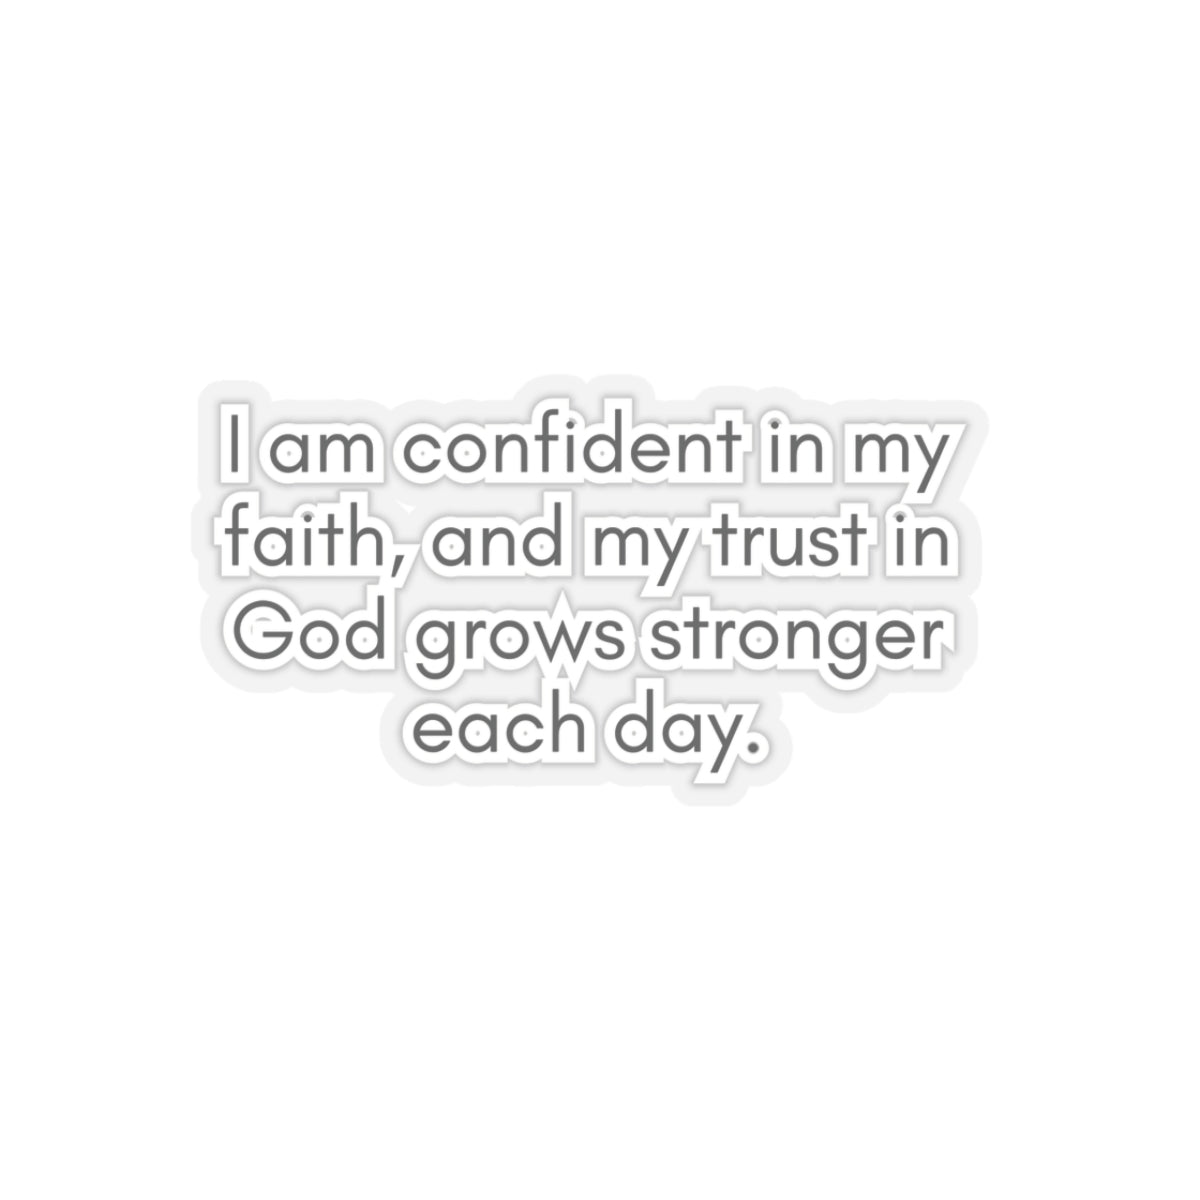 I Am Confident In My Faith... Inspirational Quote Kiss-Cut Stickers-Paper products-3" × 3"-Transparent-mysticalcherry